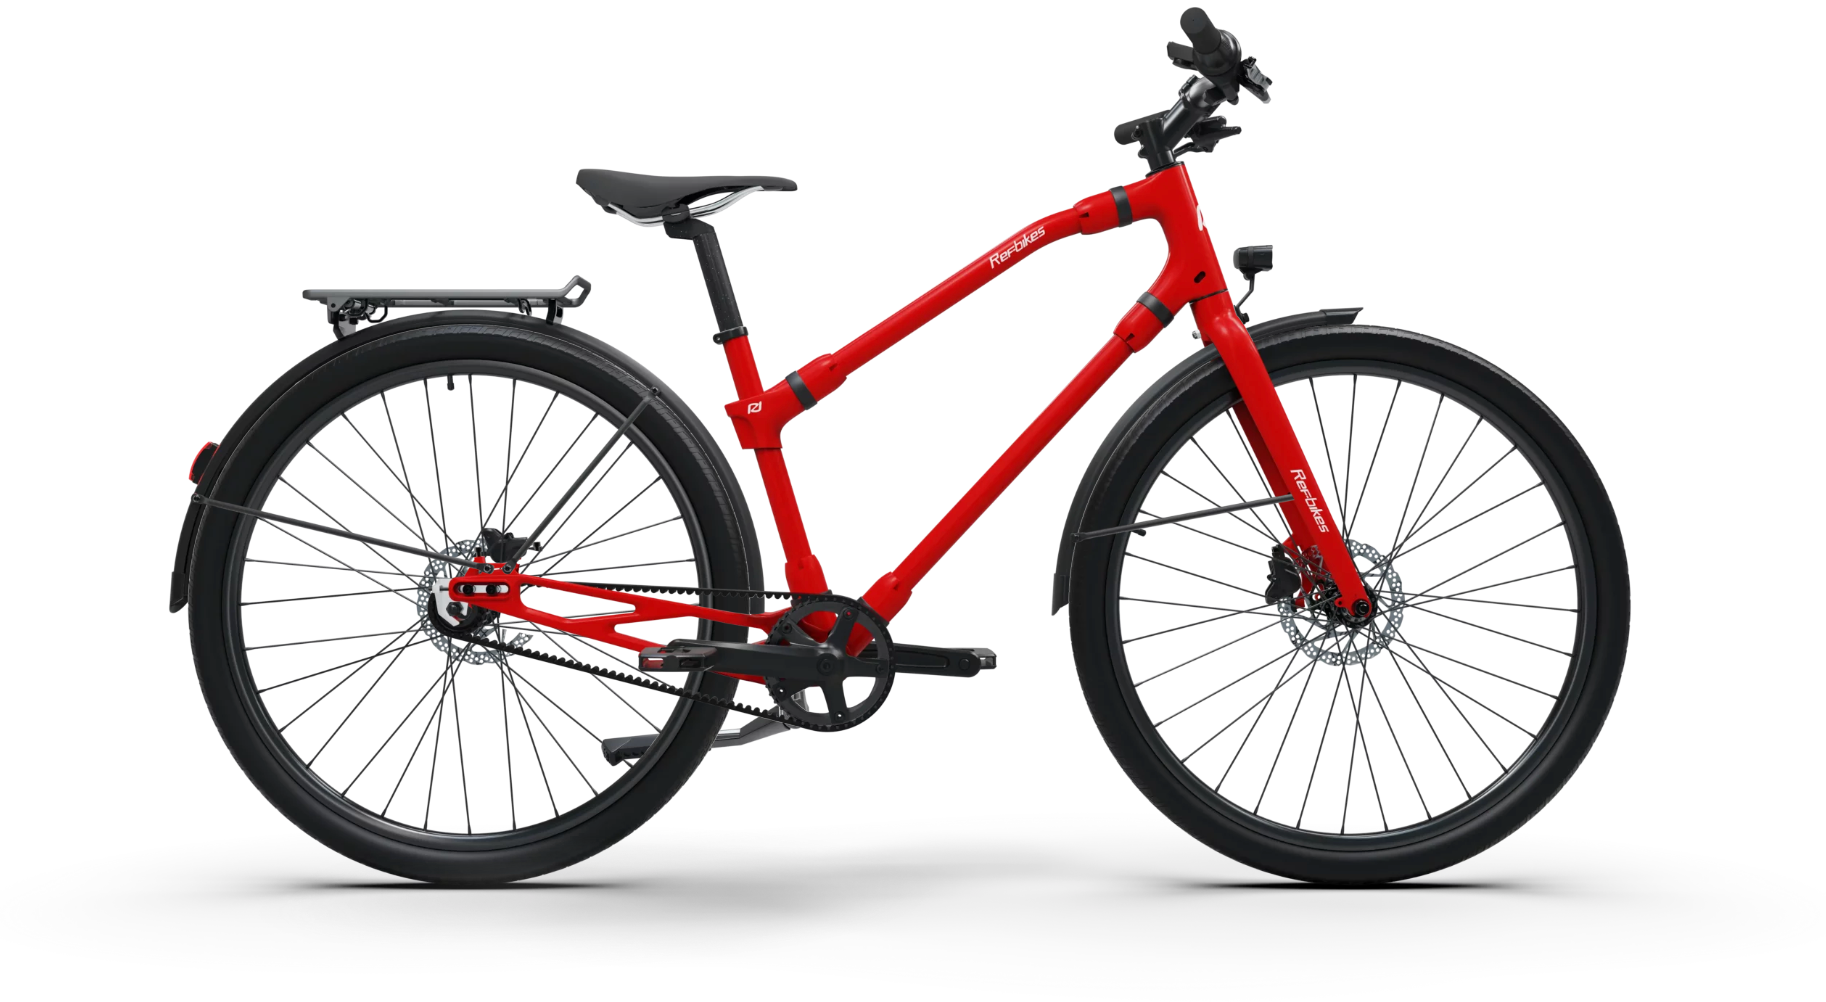 Striking red Ref Urban bike, designed for performance and style with a sustainable edge